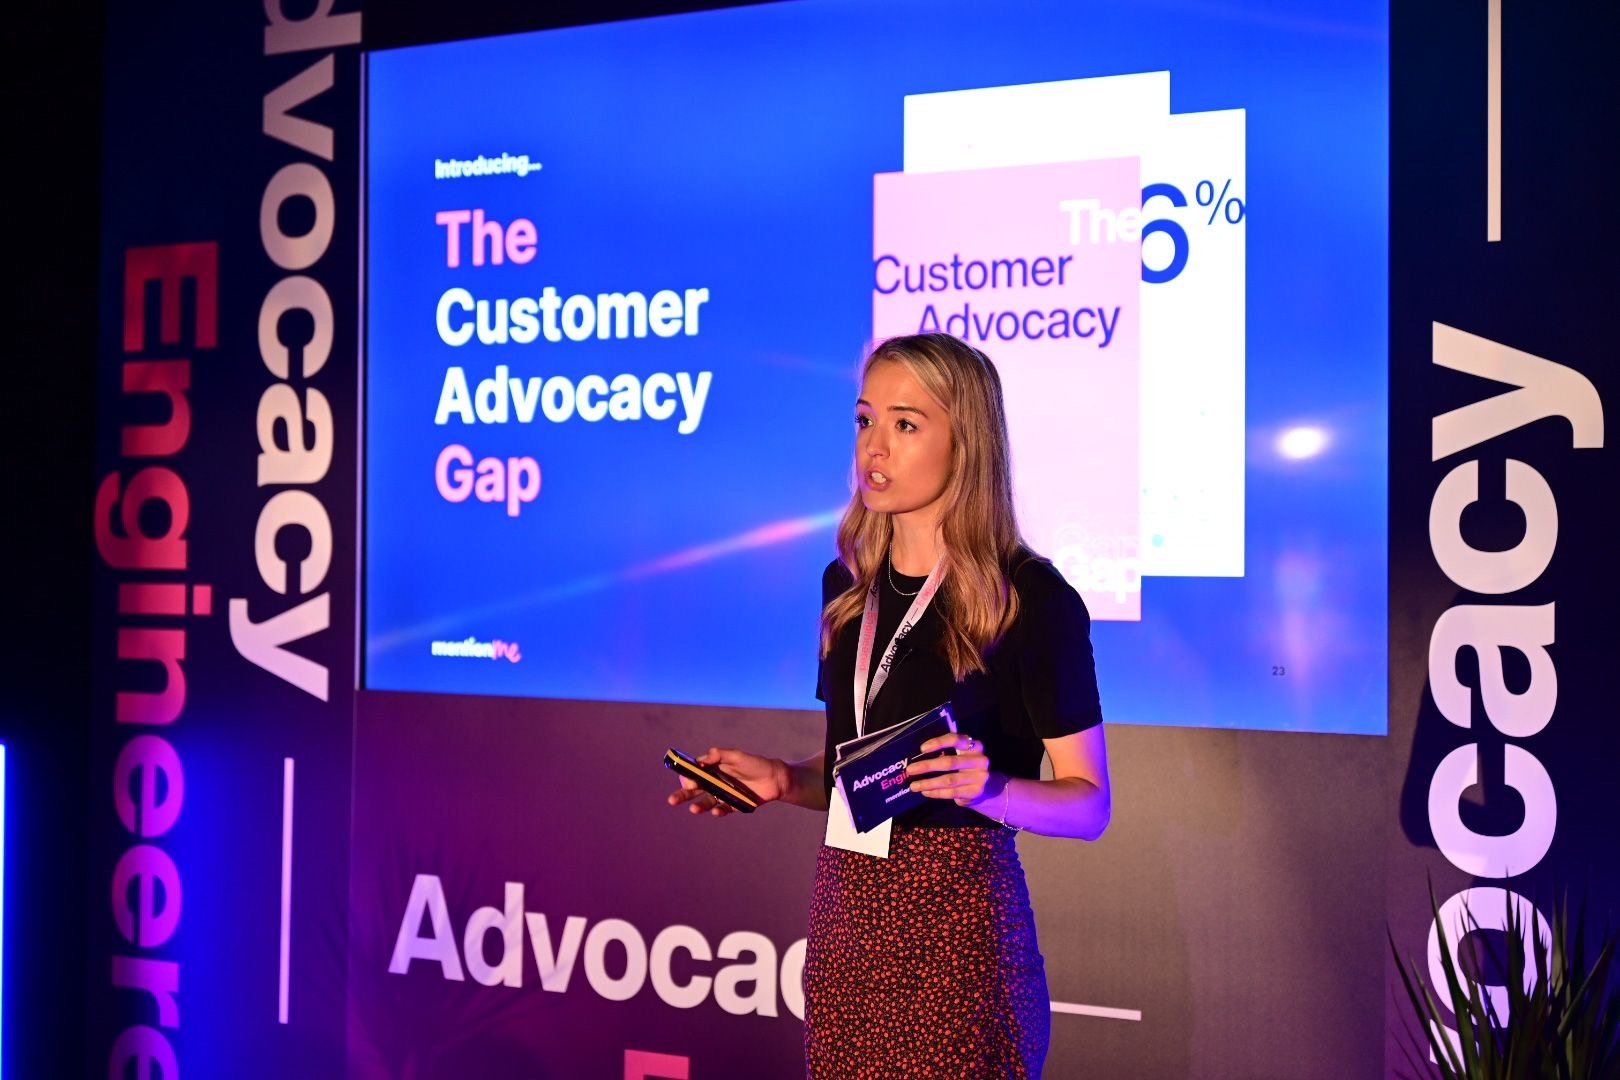 Sophia King, Head of Brand at Mention Me, presenting The Customer Advocacy Gap report